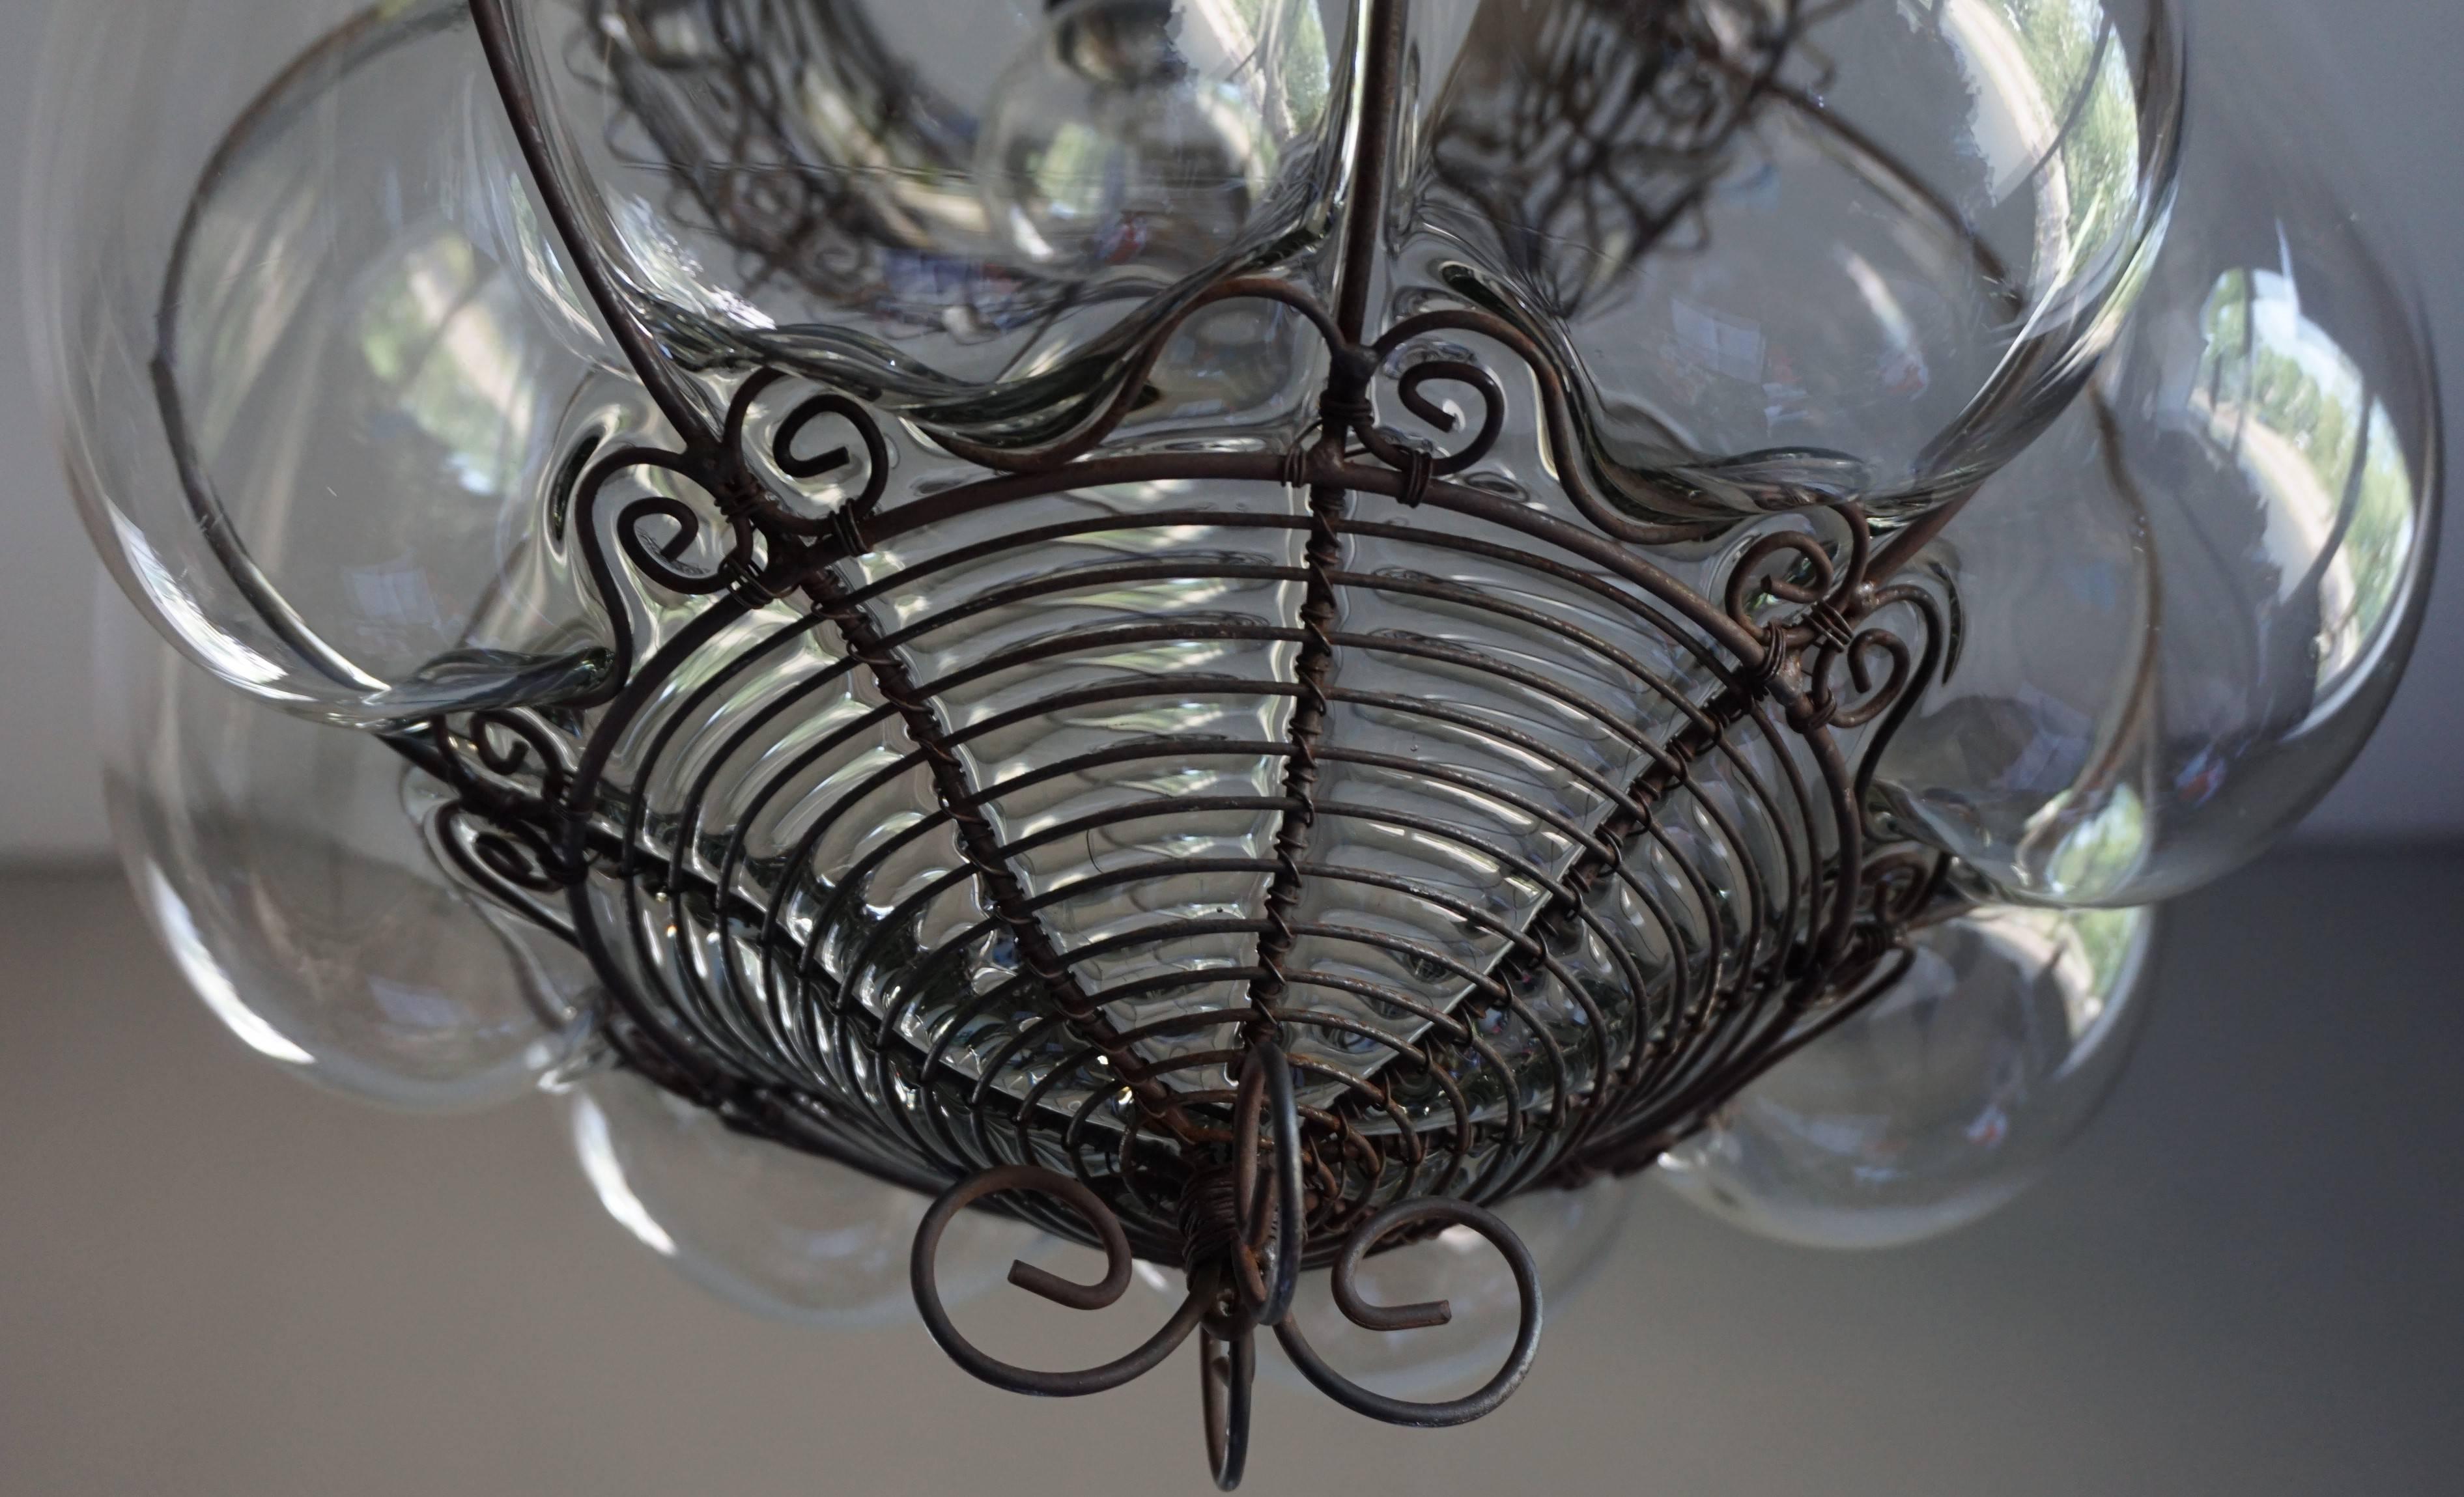 Italian Venetian Mouthblown Glass into a Hand-crafted Iron Frame Pendant Light Fixture For Sale